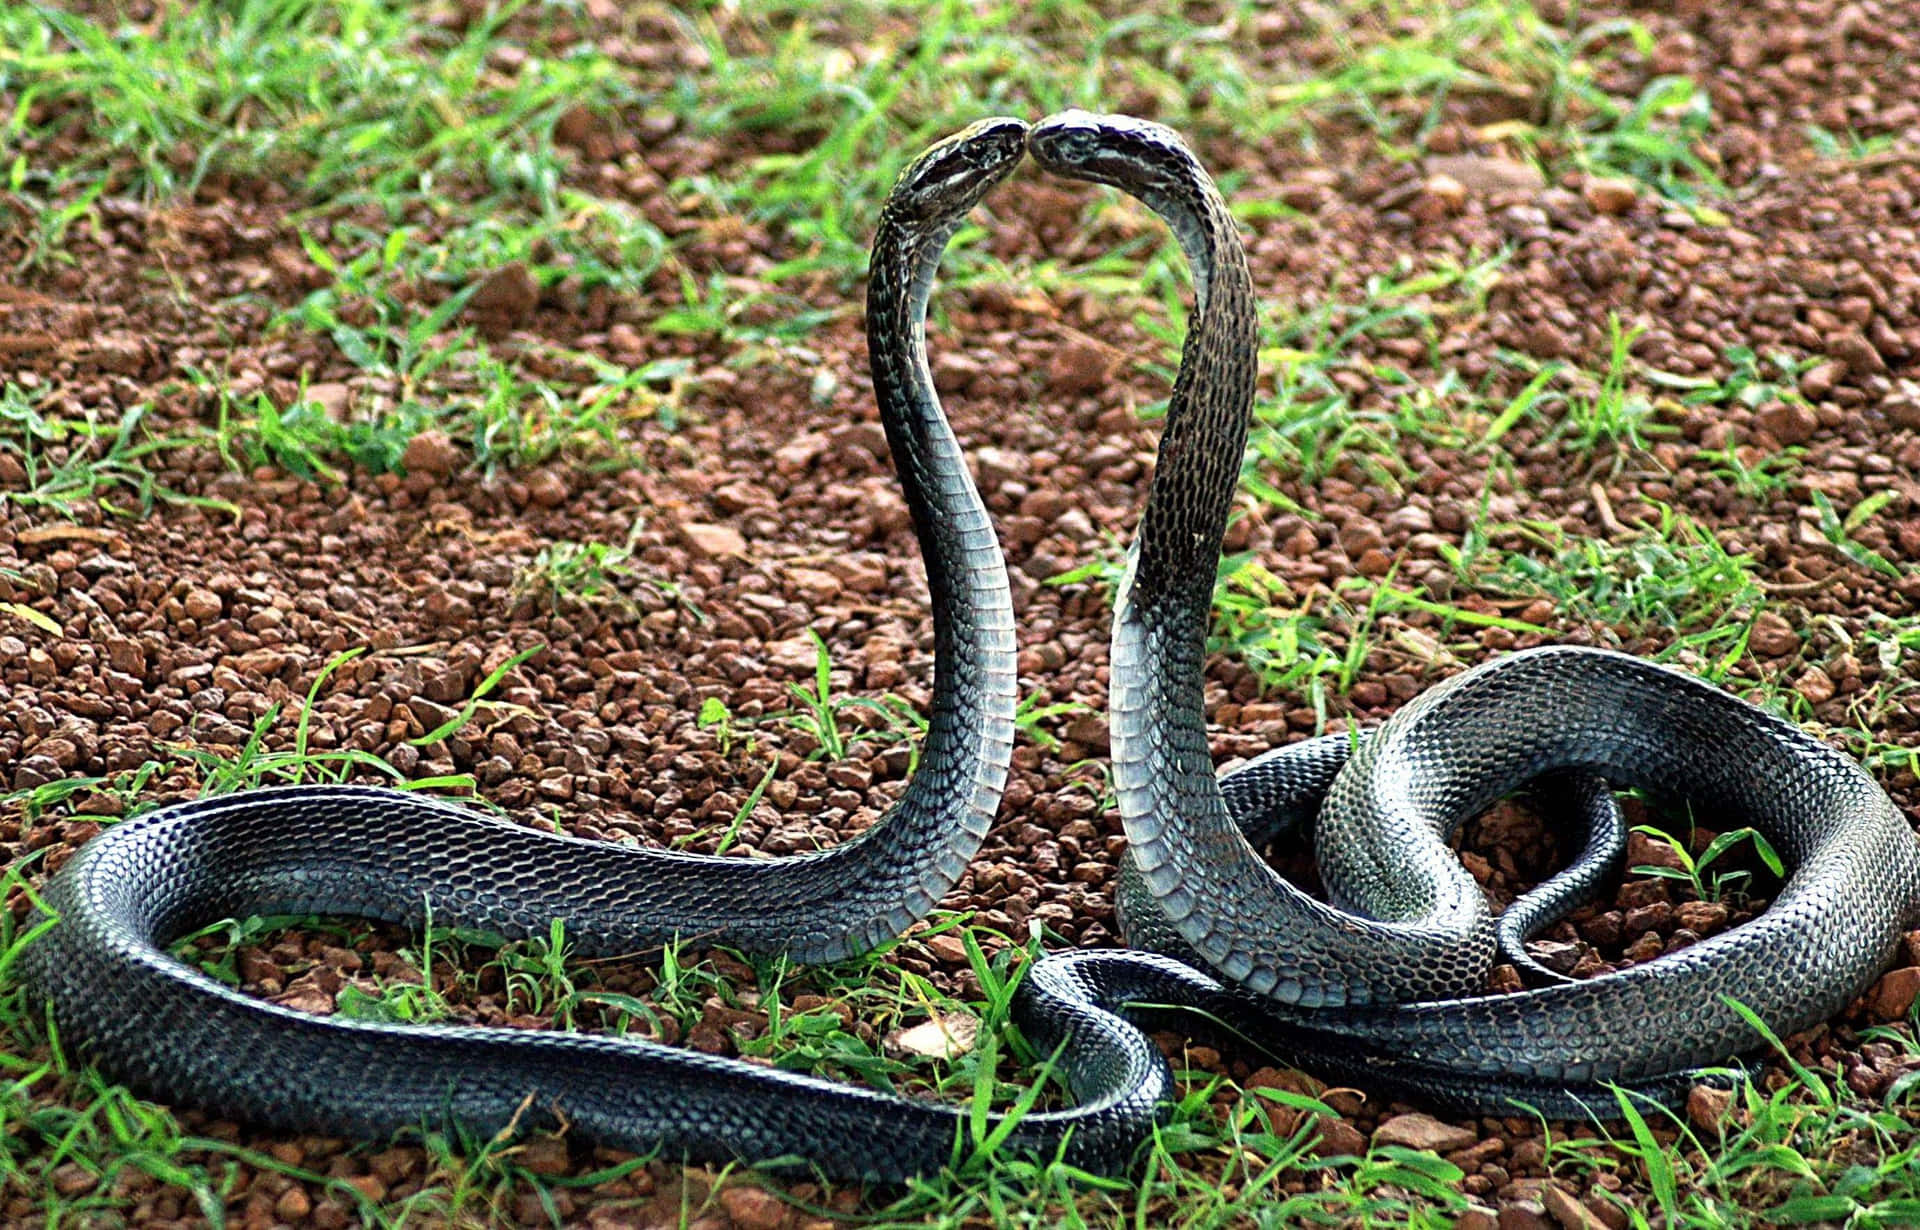 Two Black Snakes Are Sitting On The Ground Wallpaper